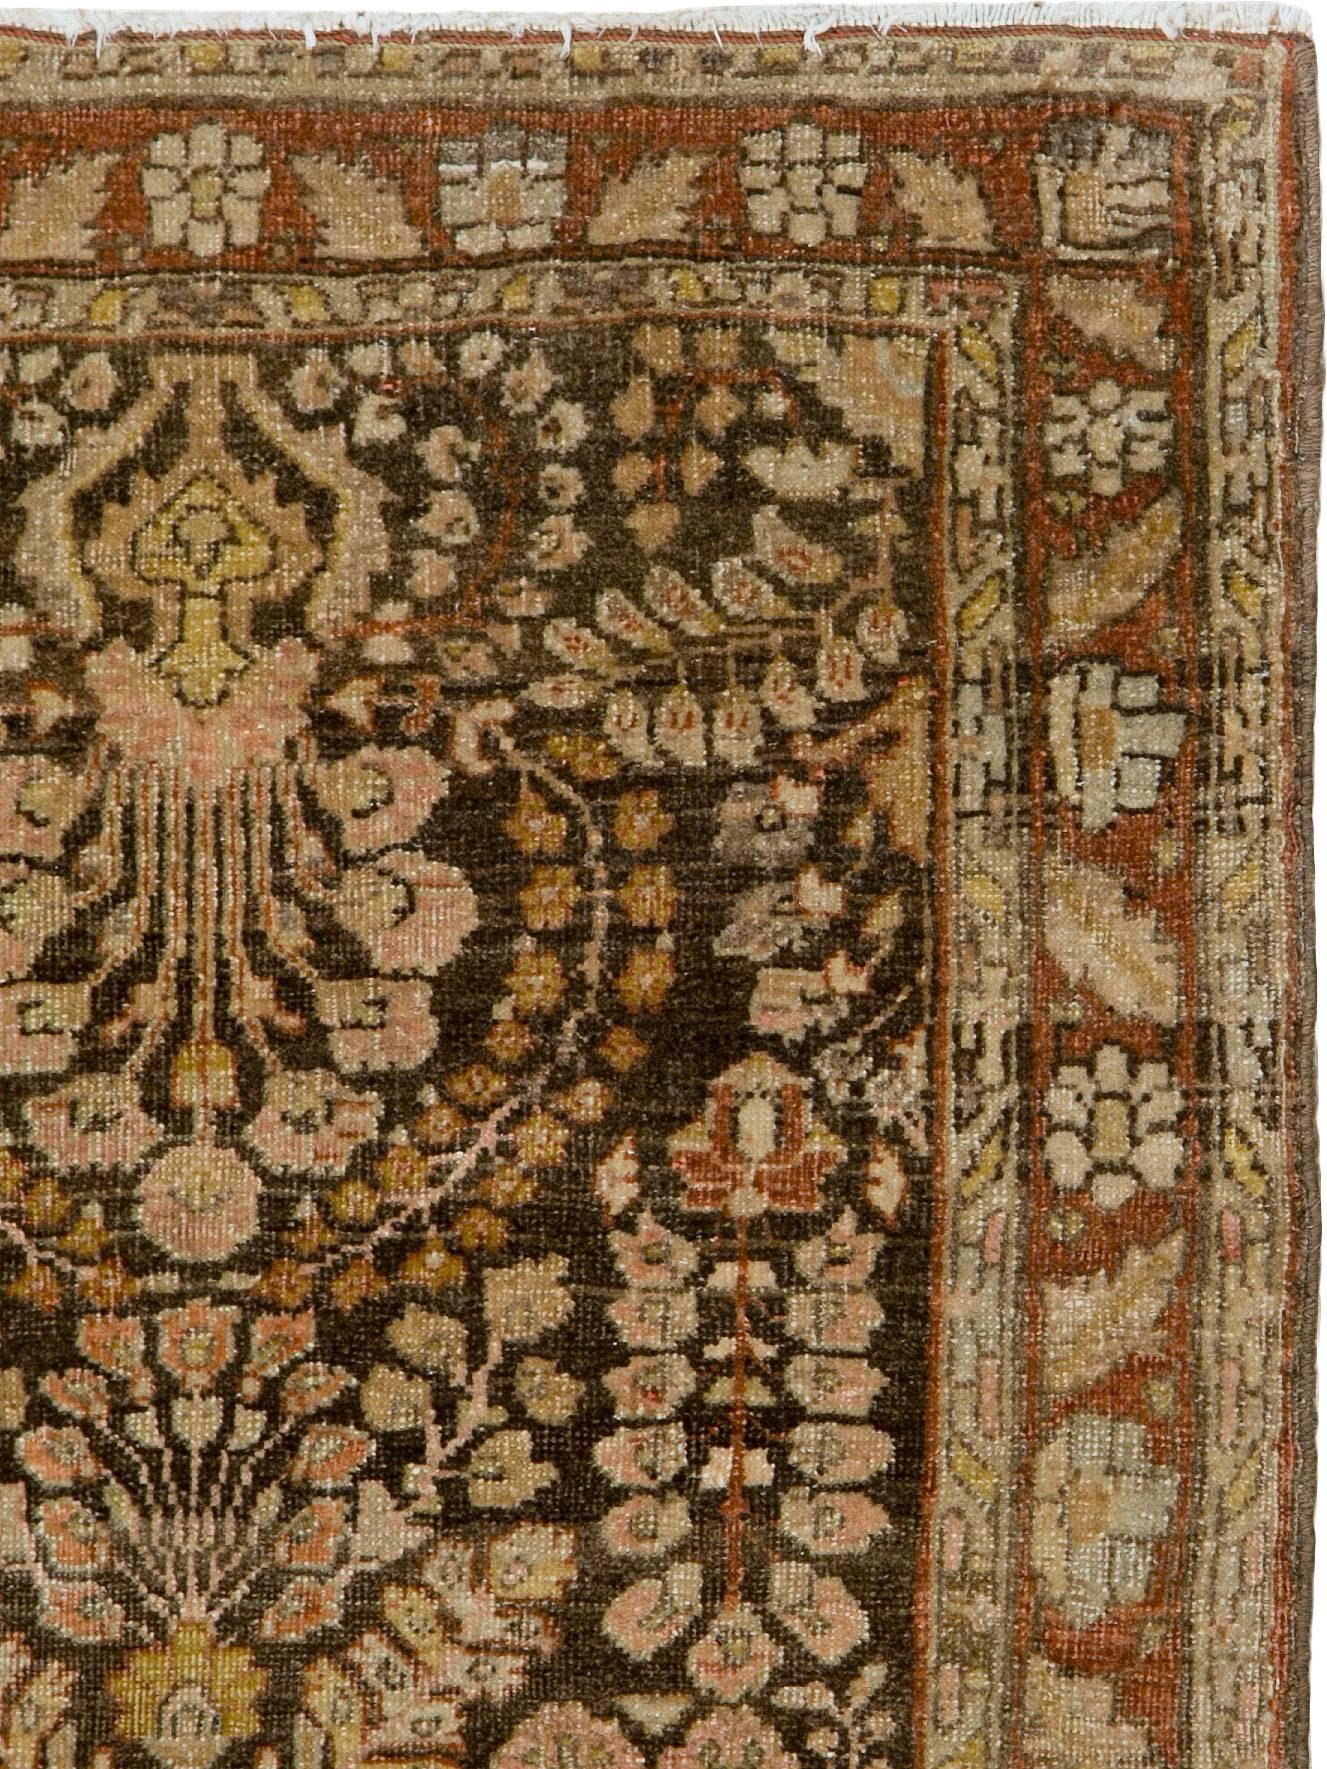 An antique Persian Sarouk rug from the first quarter of the 20th century.
 